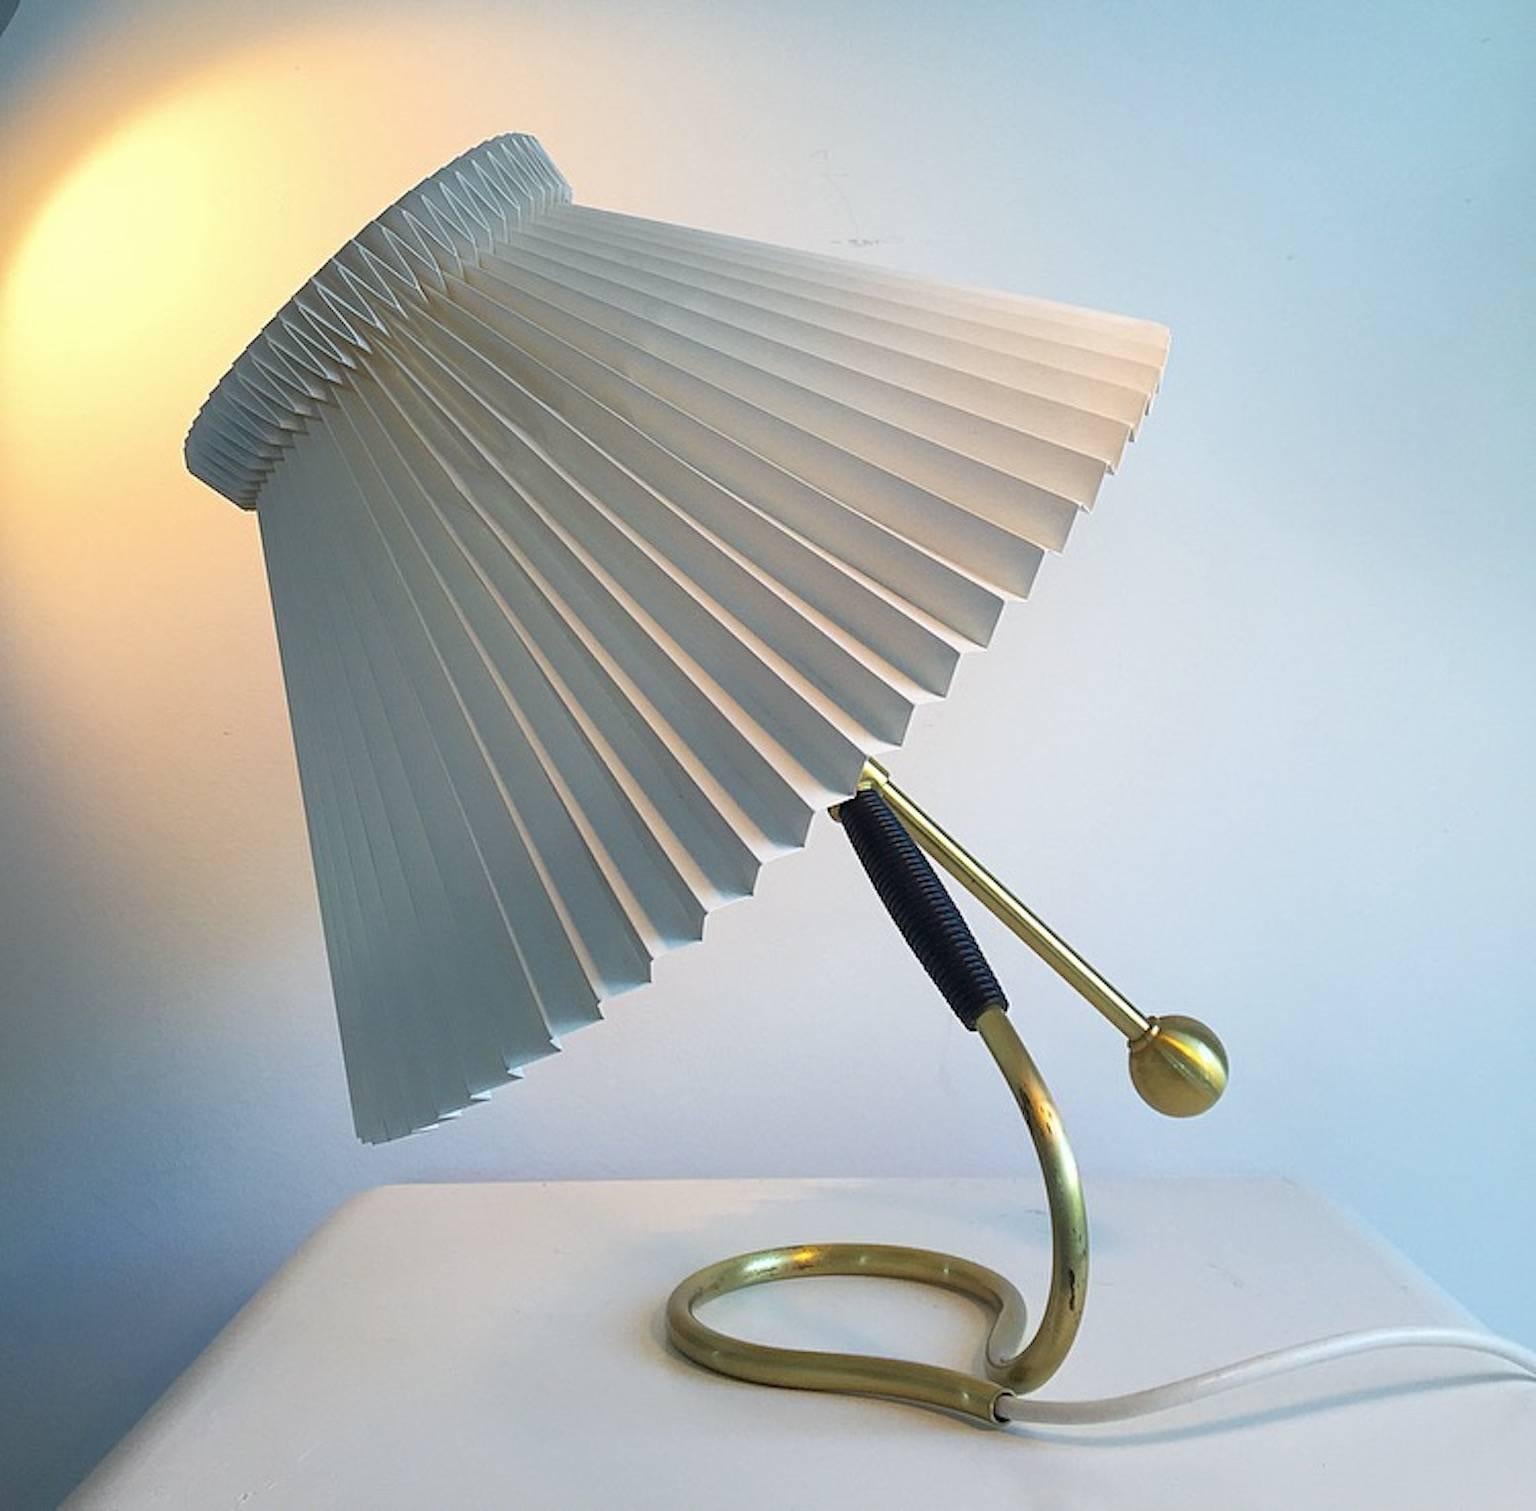 The grand father of Danish design Kaare Klint designed this beautiful brass lamp in 1945 and added a functionality to the lamp that hasn't been seen before at that time: The lamp could be tilted in different positions and even be used as a wall